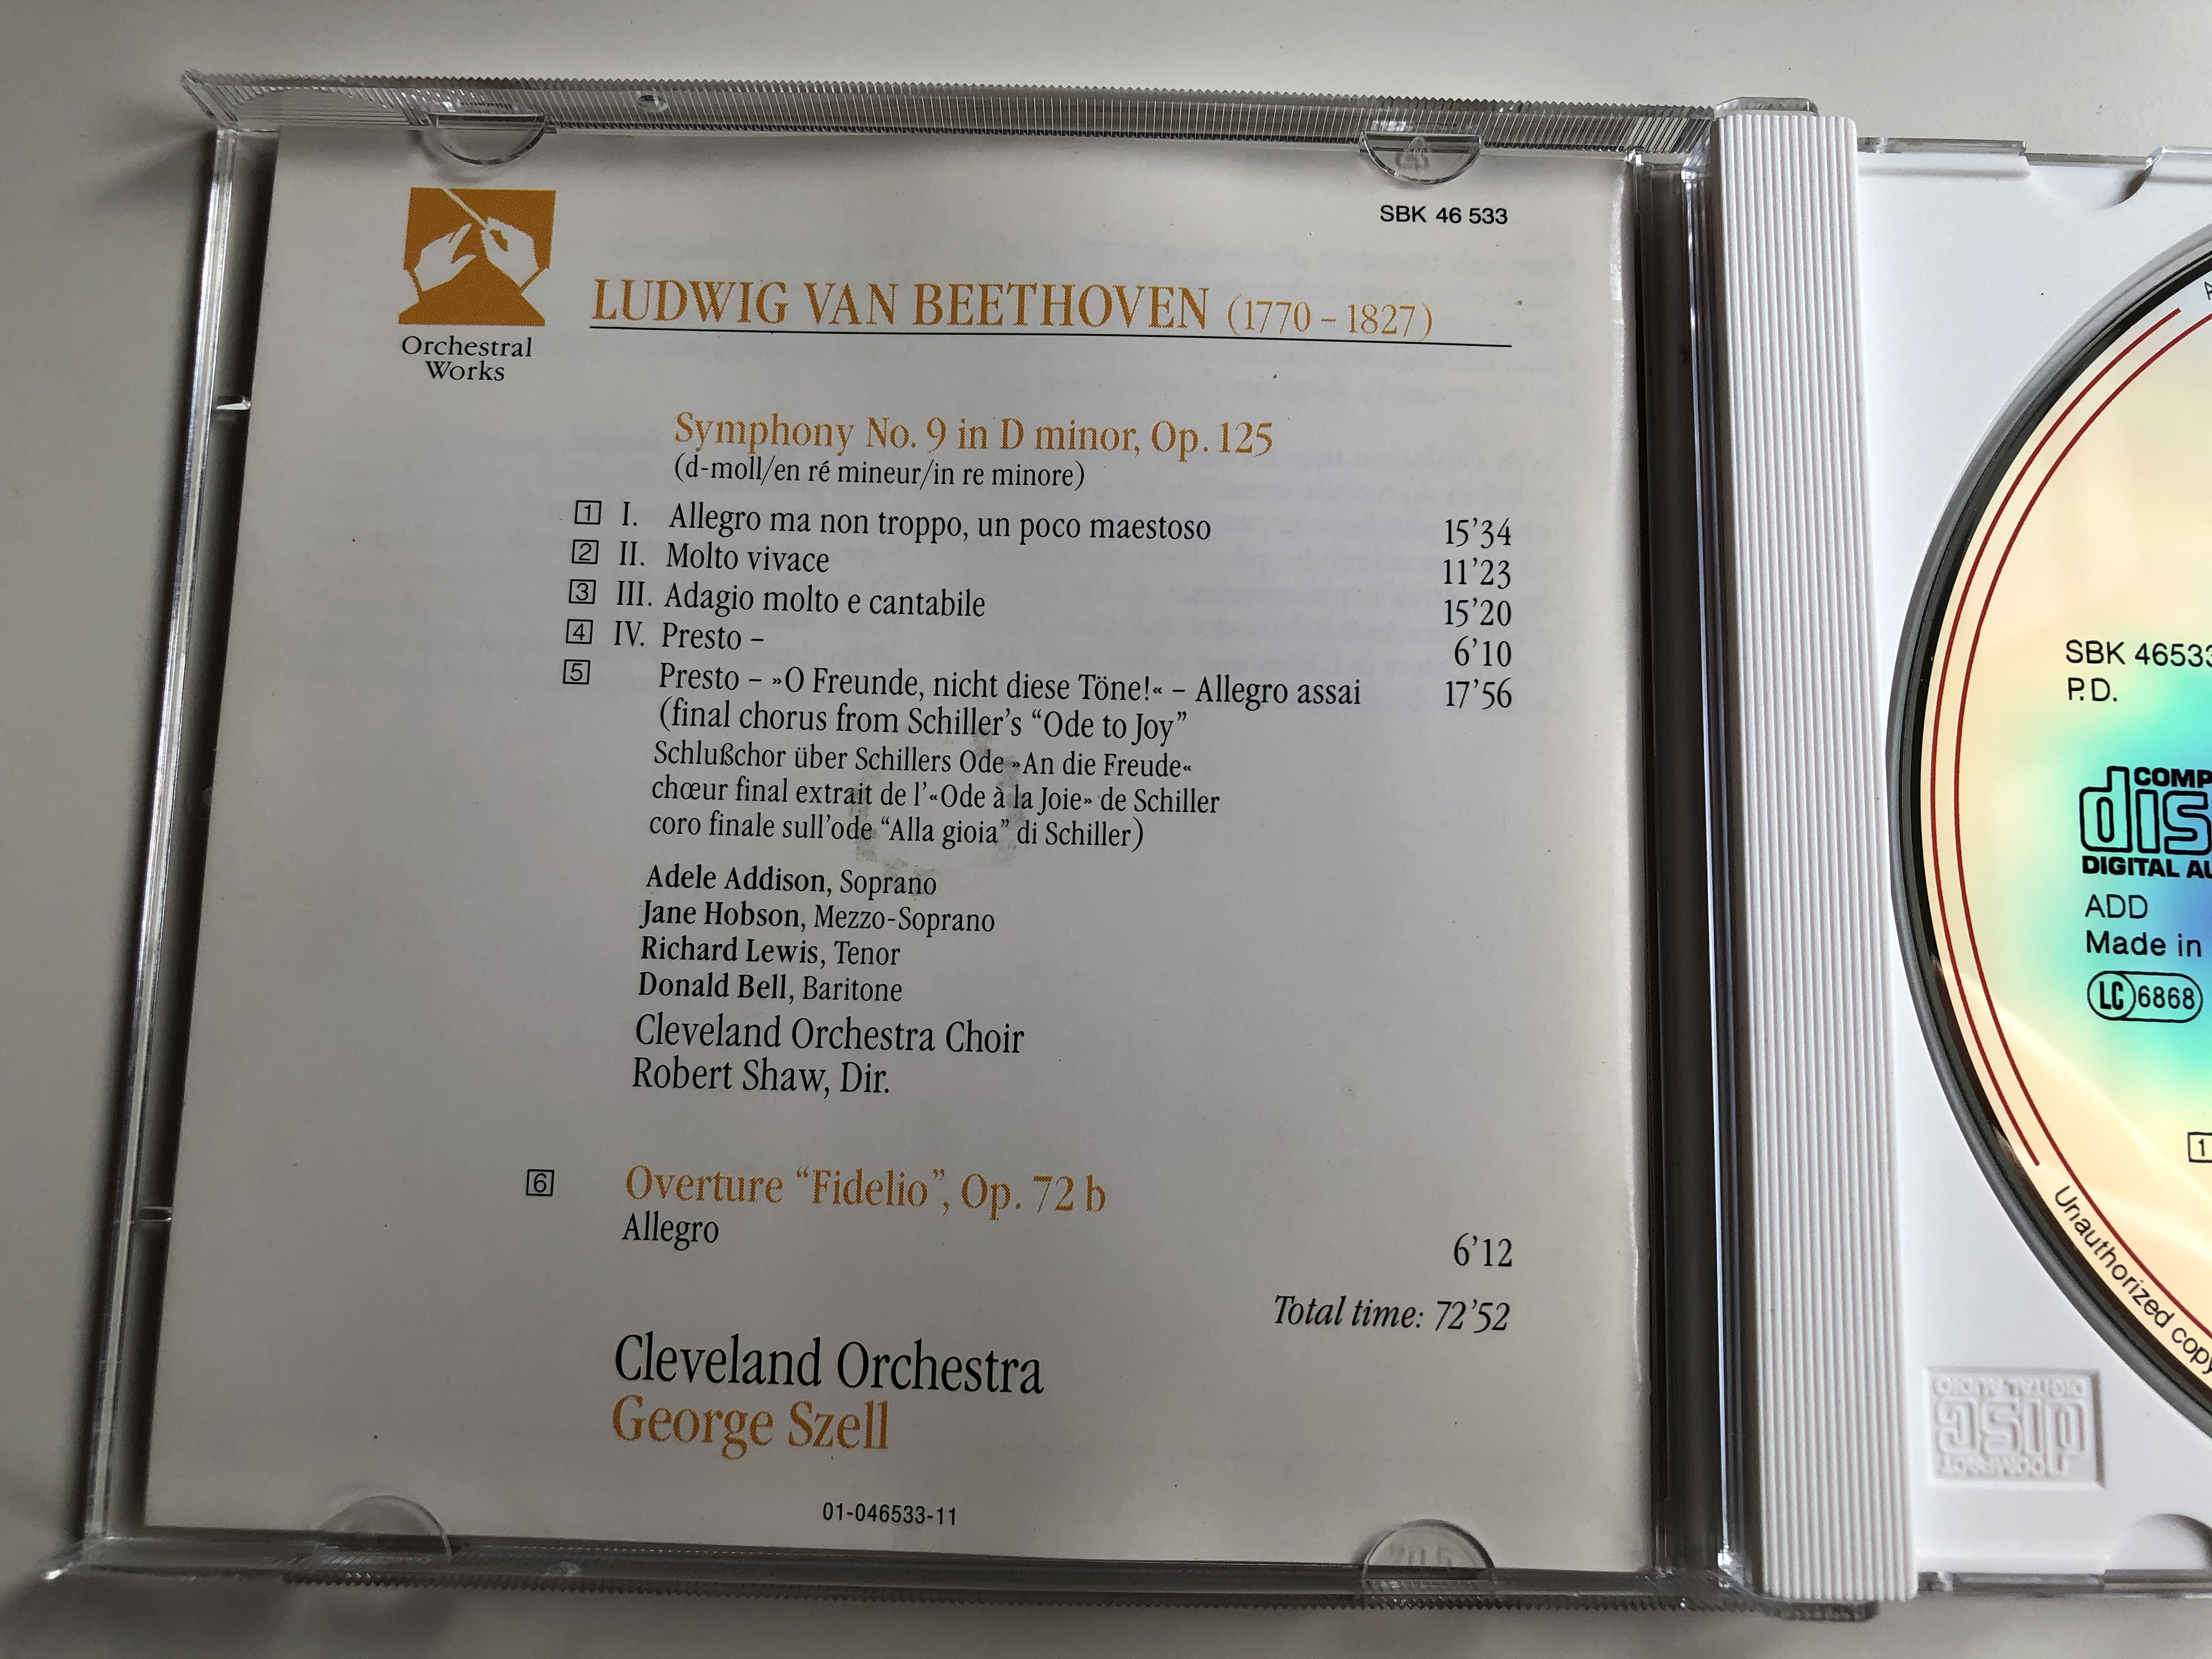 beethoven-symphony-no.-9-choral-fidelio-overture-adele-addison-jane-hobson-richard-lewis-donald-bell-cleveland-orchestra-choir-george-szell-sony-classical-audio-cd-1991-sbk-465-8-.jpg